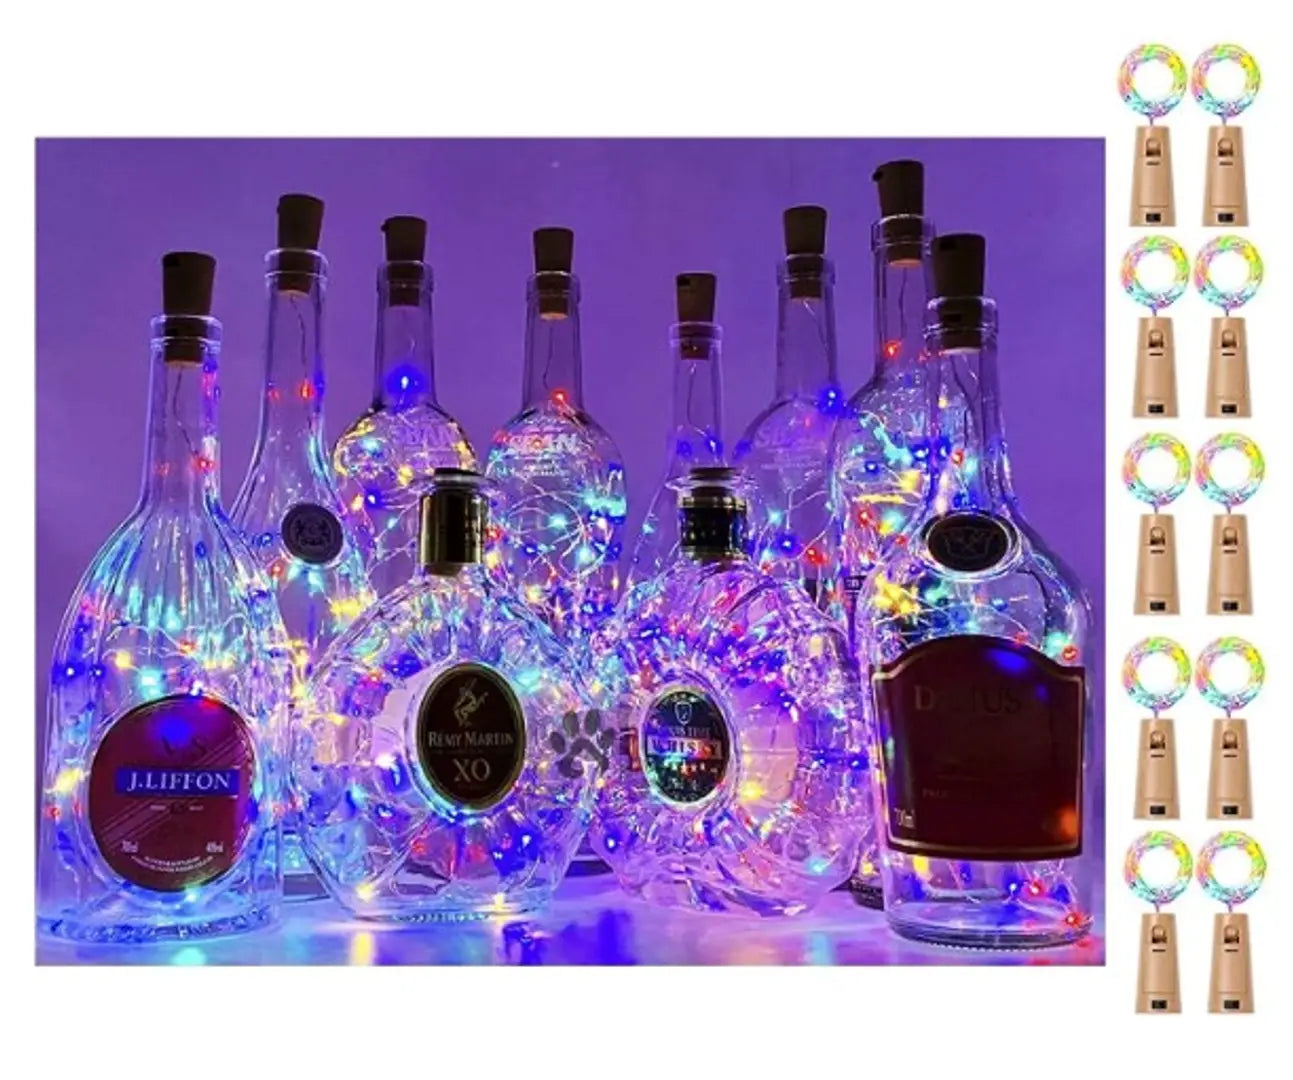 Trending Trunks 20 LED Wine Bottle Cork Lights with Copper Wire String Fairy Lights 2 Meter Battery Operated (Multicolour) (Pack of 10) (Non Returnable)